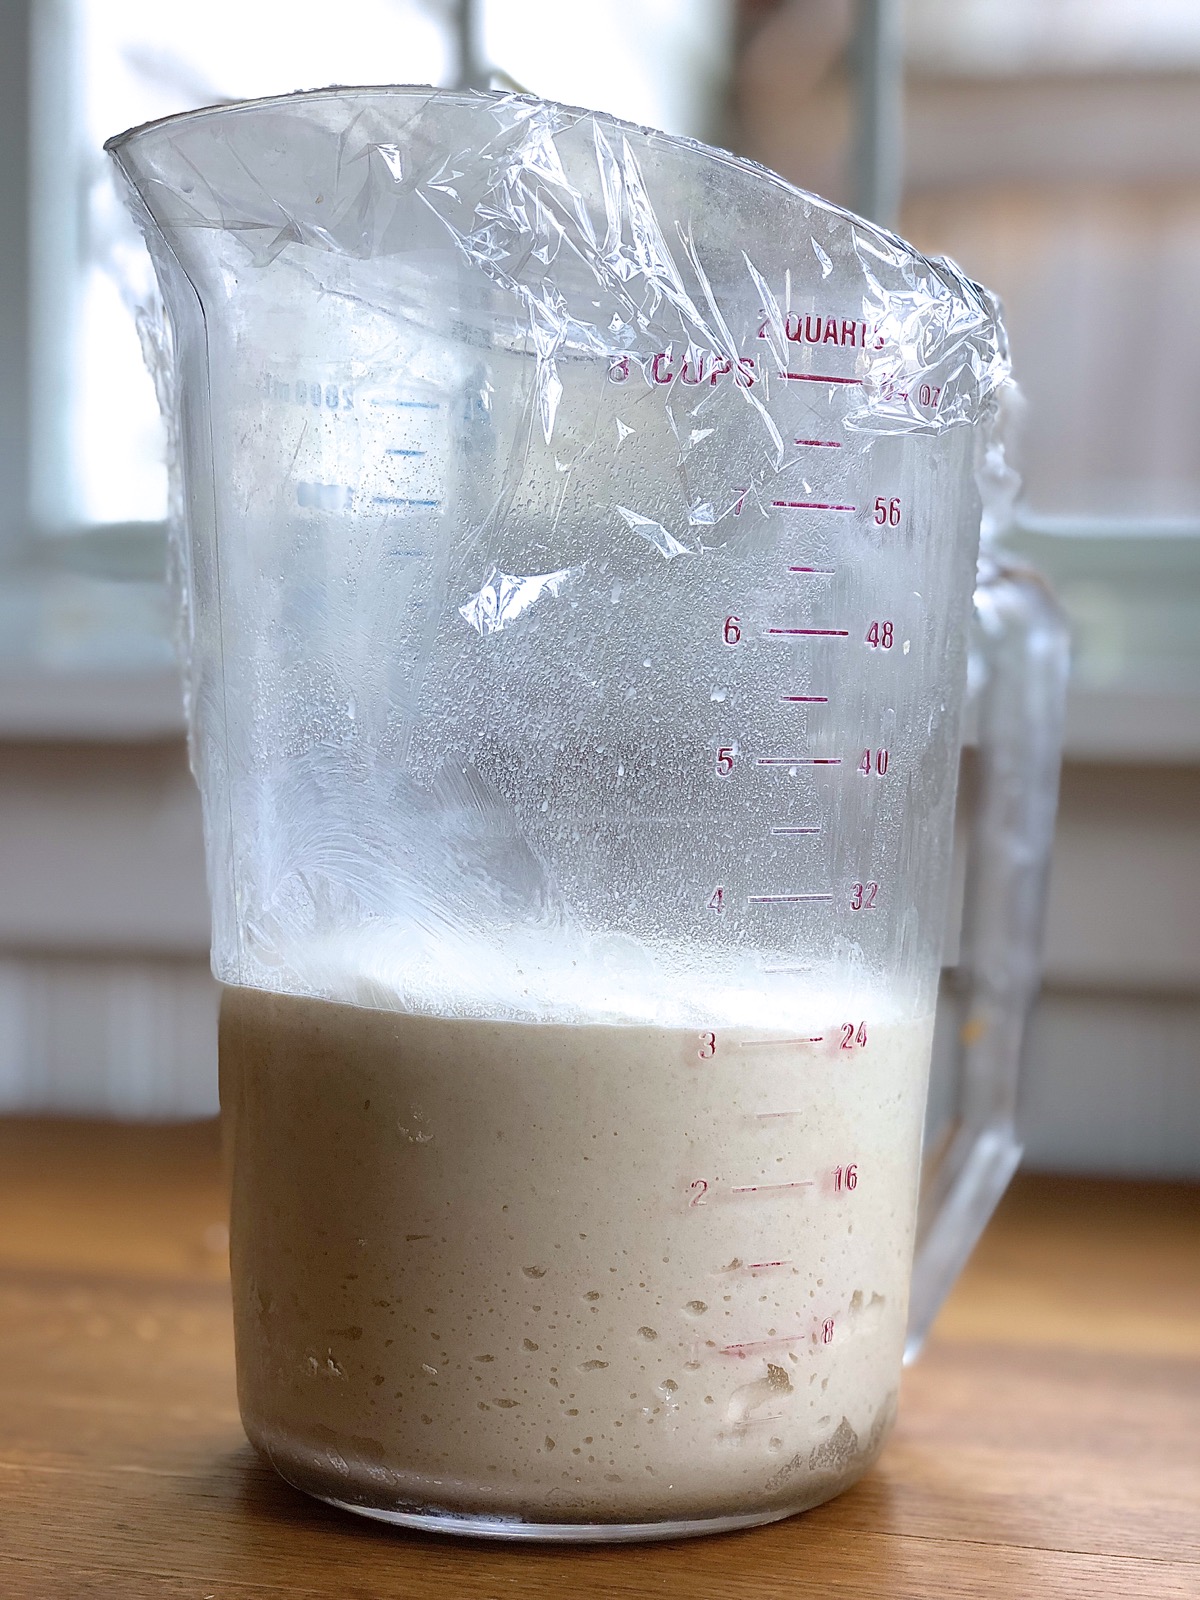 Dough in an 8-cup measure, with scattered bubbles towards the bottom.